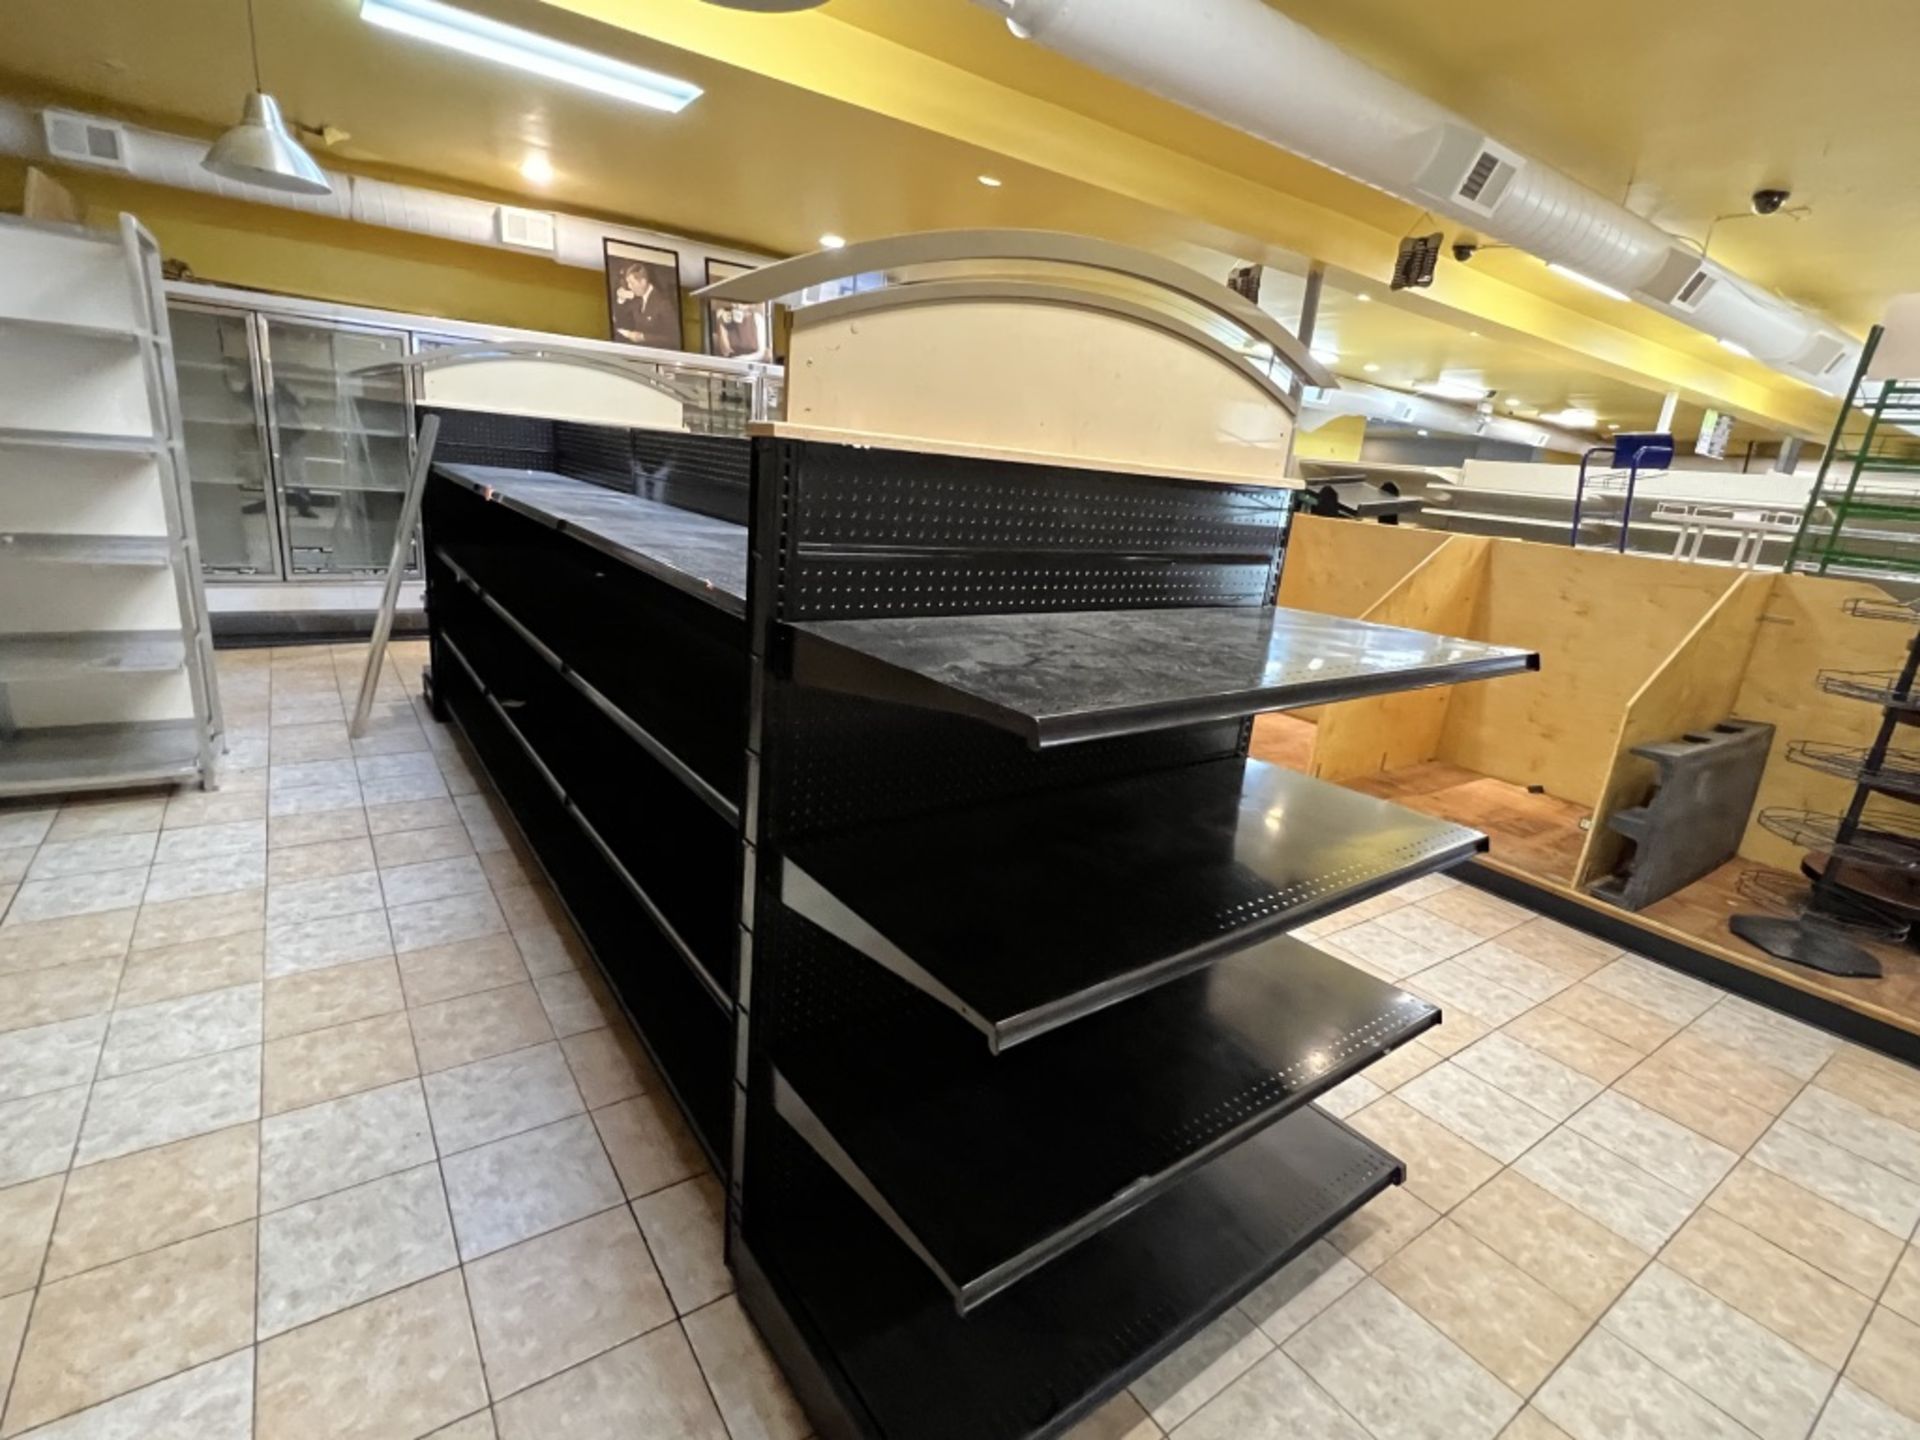 8 Section adjustable Gondola shelving system Approximately 195” Long X 50” Wide with 2 archways o - Image 7 of 12